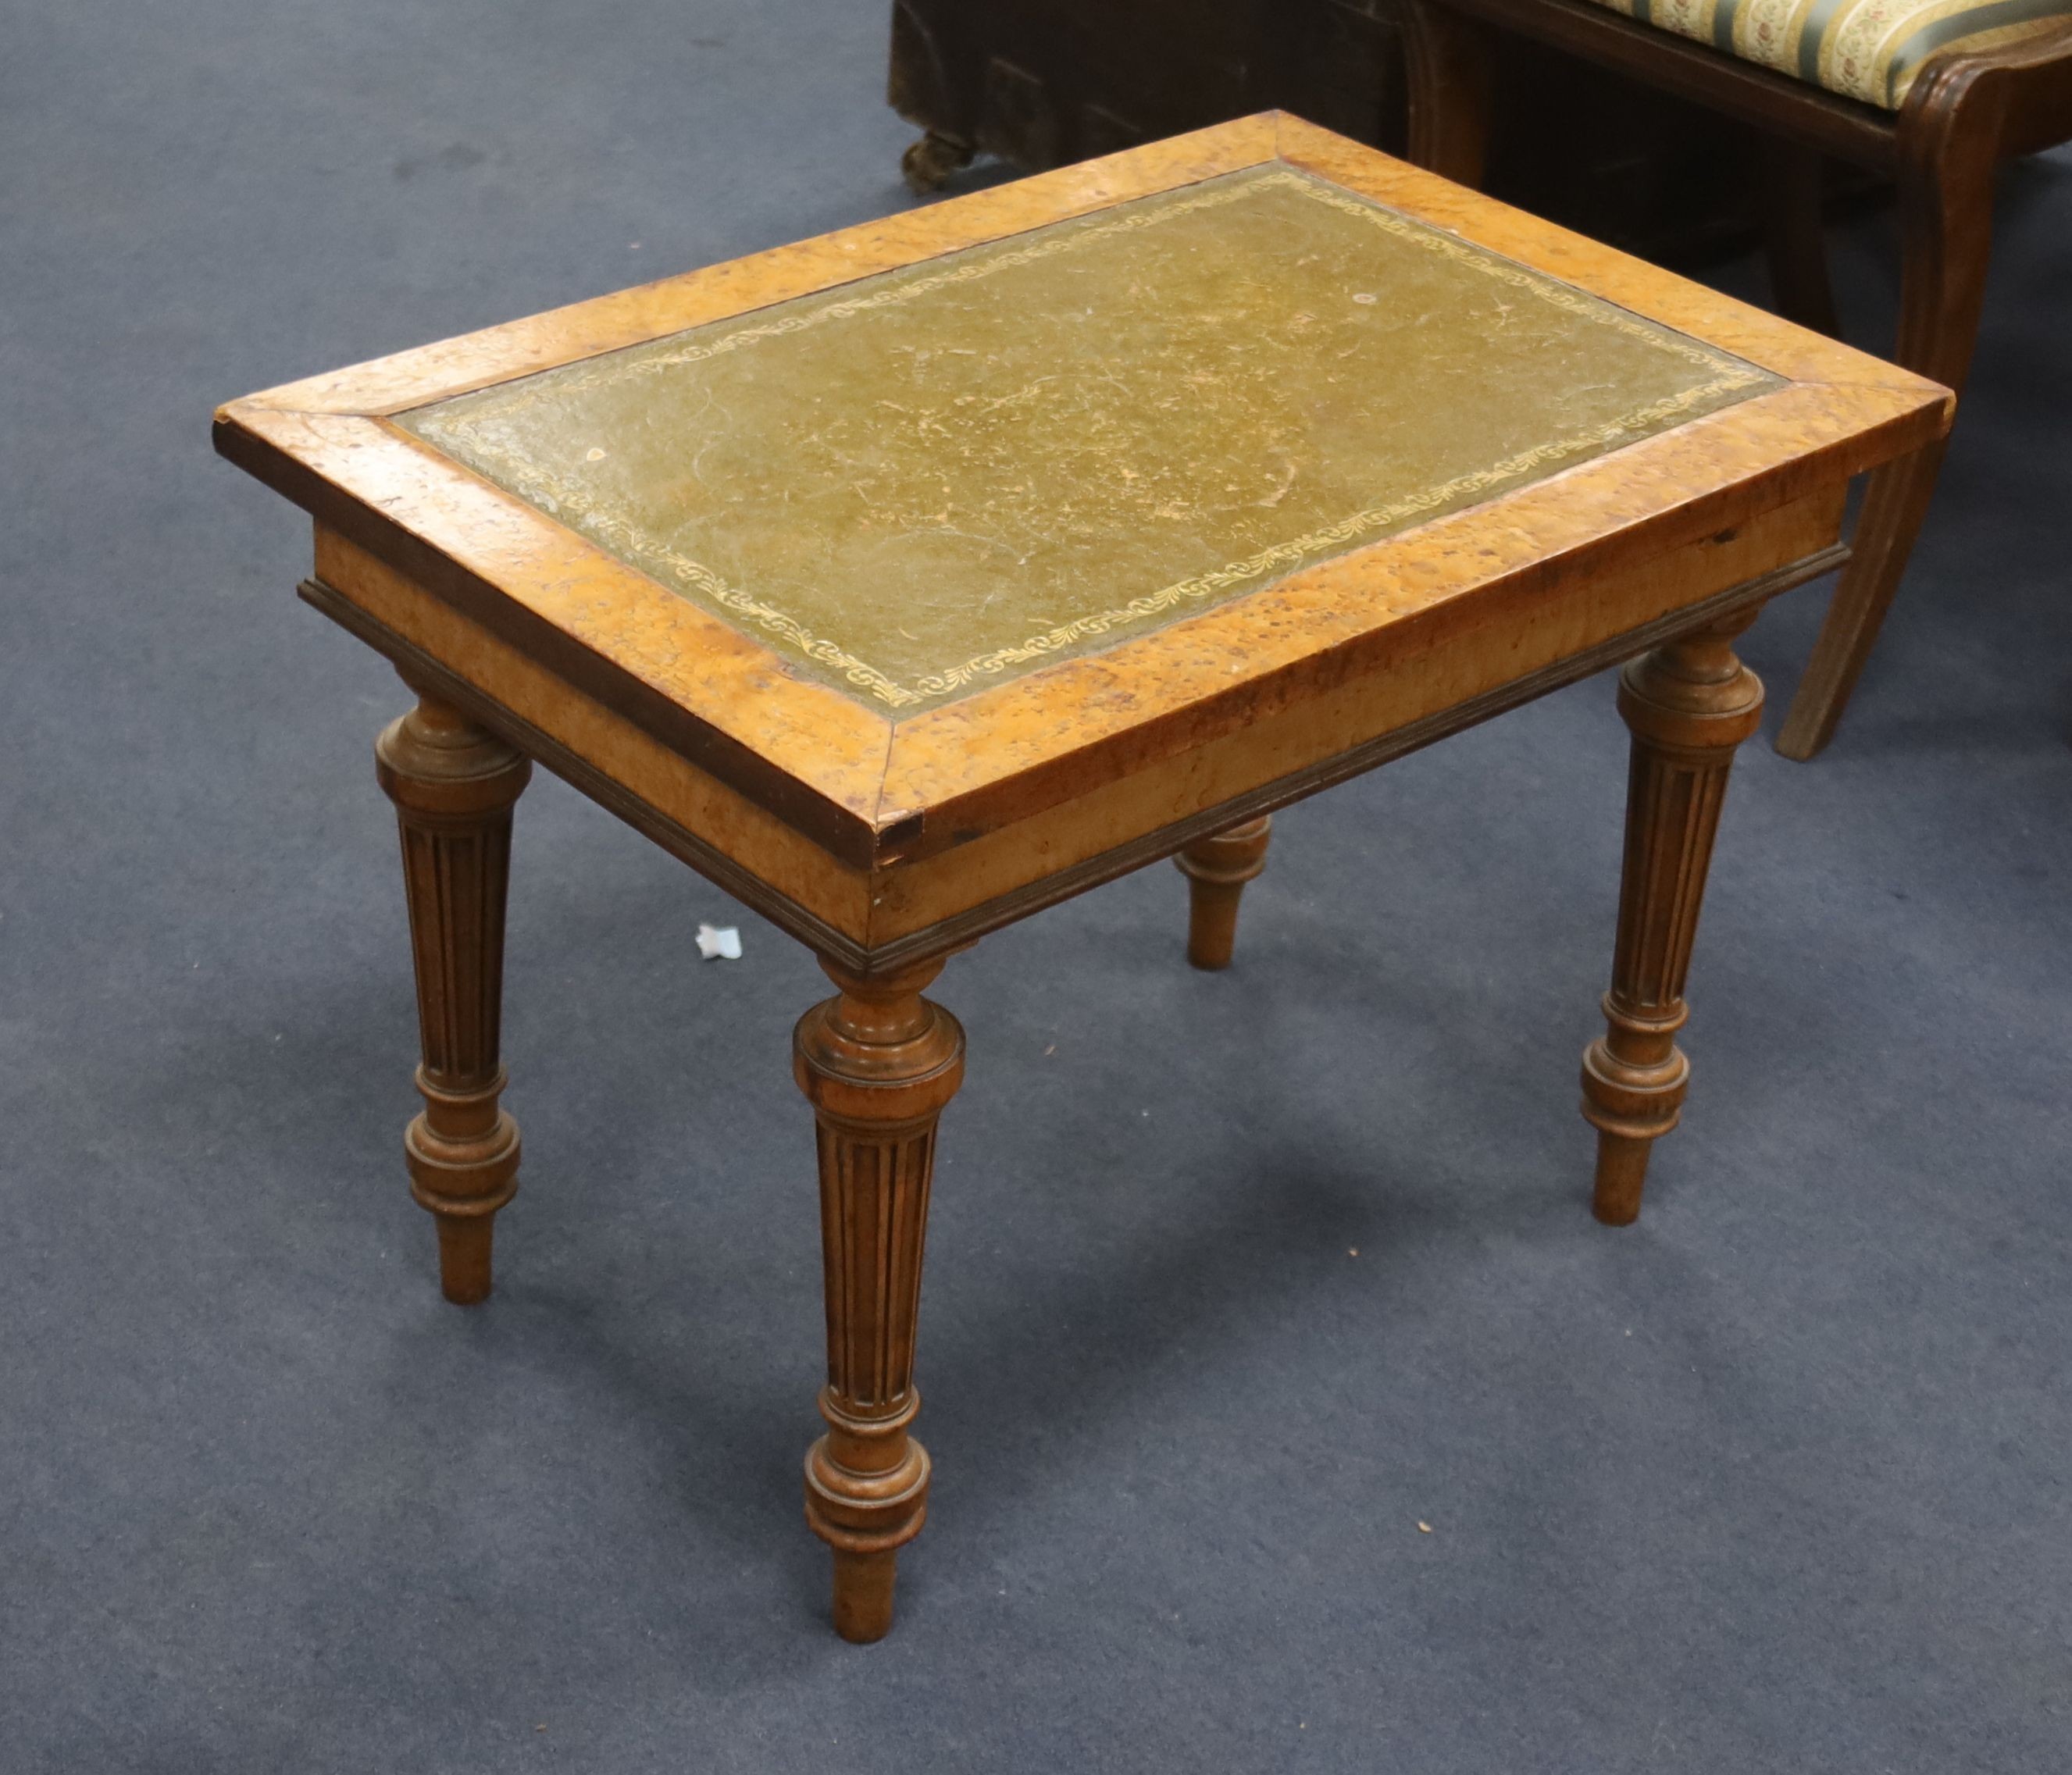 A Victorian bird's eye maple veneered leather-topped rectangular topped occasional table (ex bidet), - Image 3 of 3